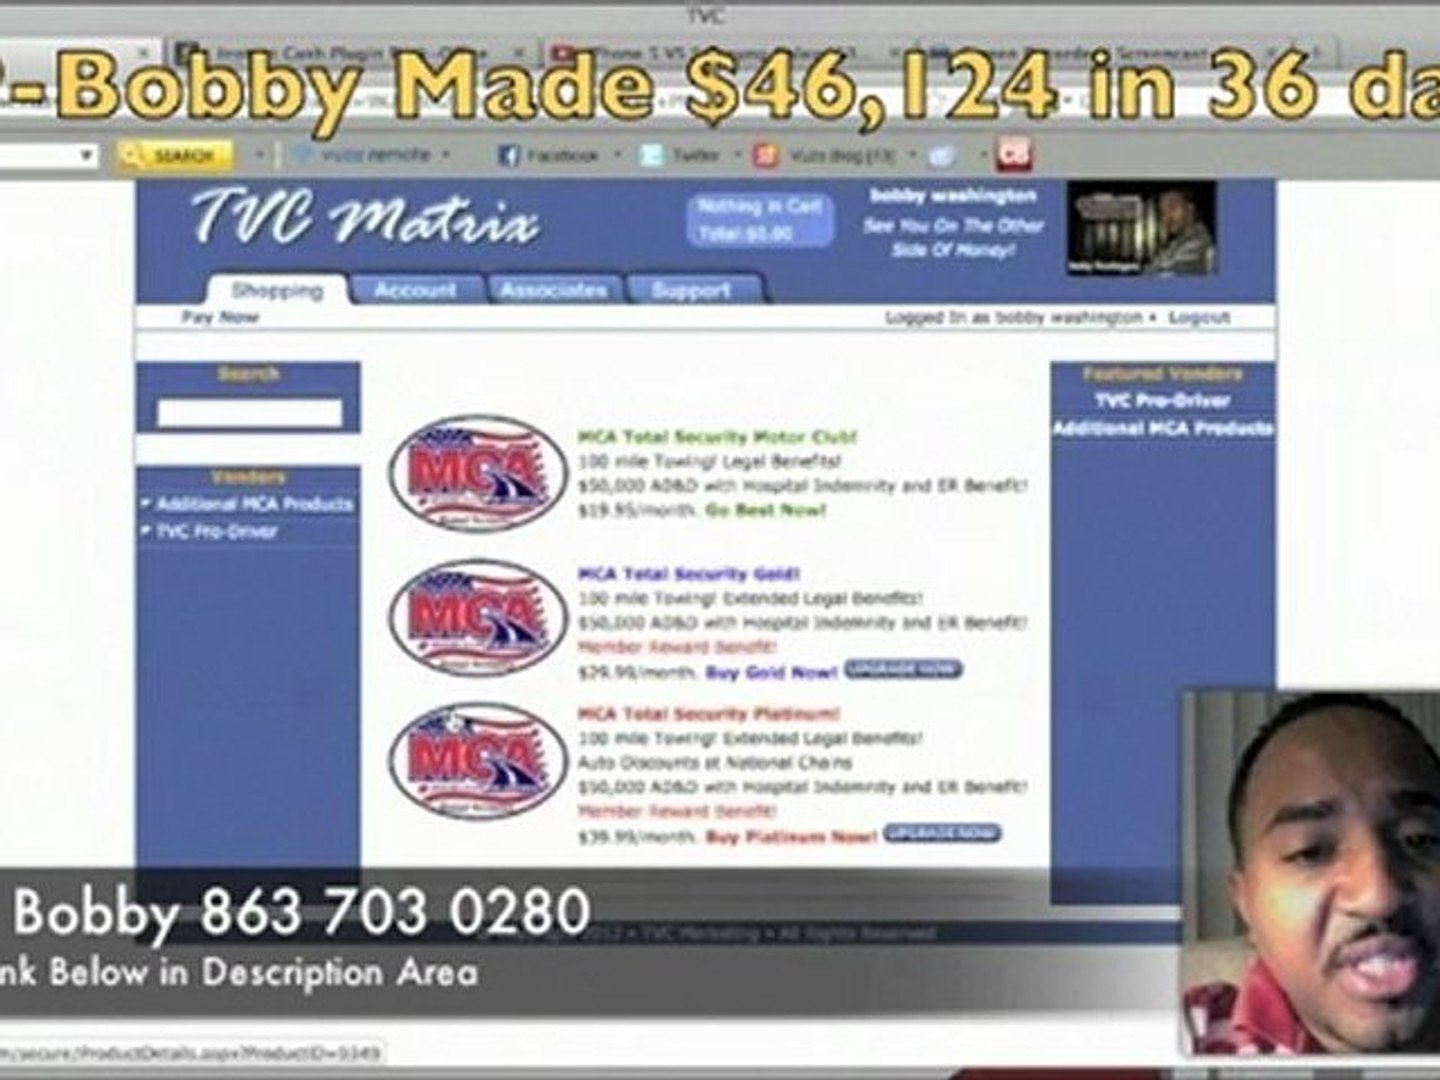 Instant Cash Plugin - Bobby Washington Earned 46 Thousand in 37 Days